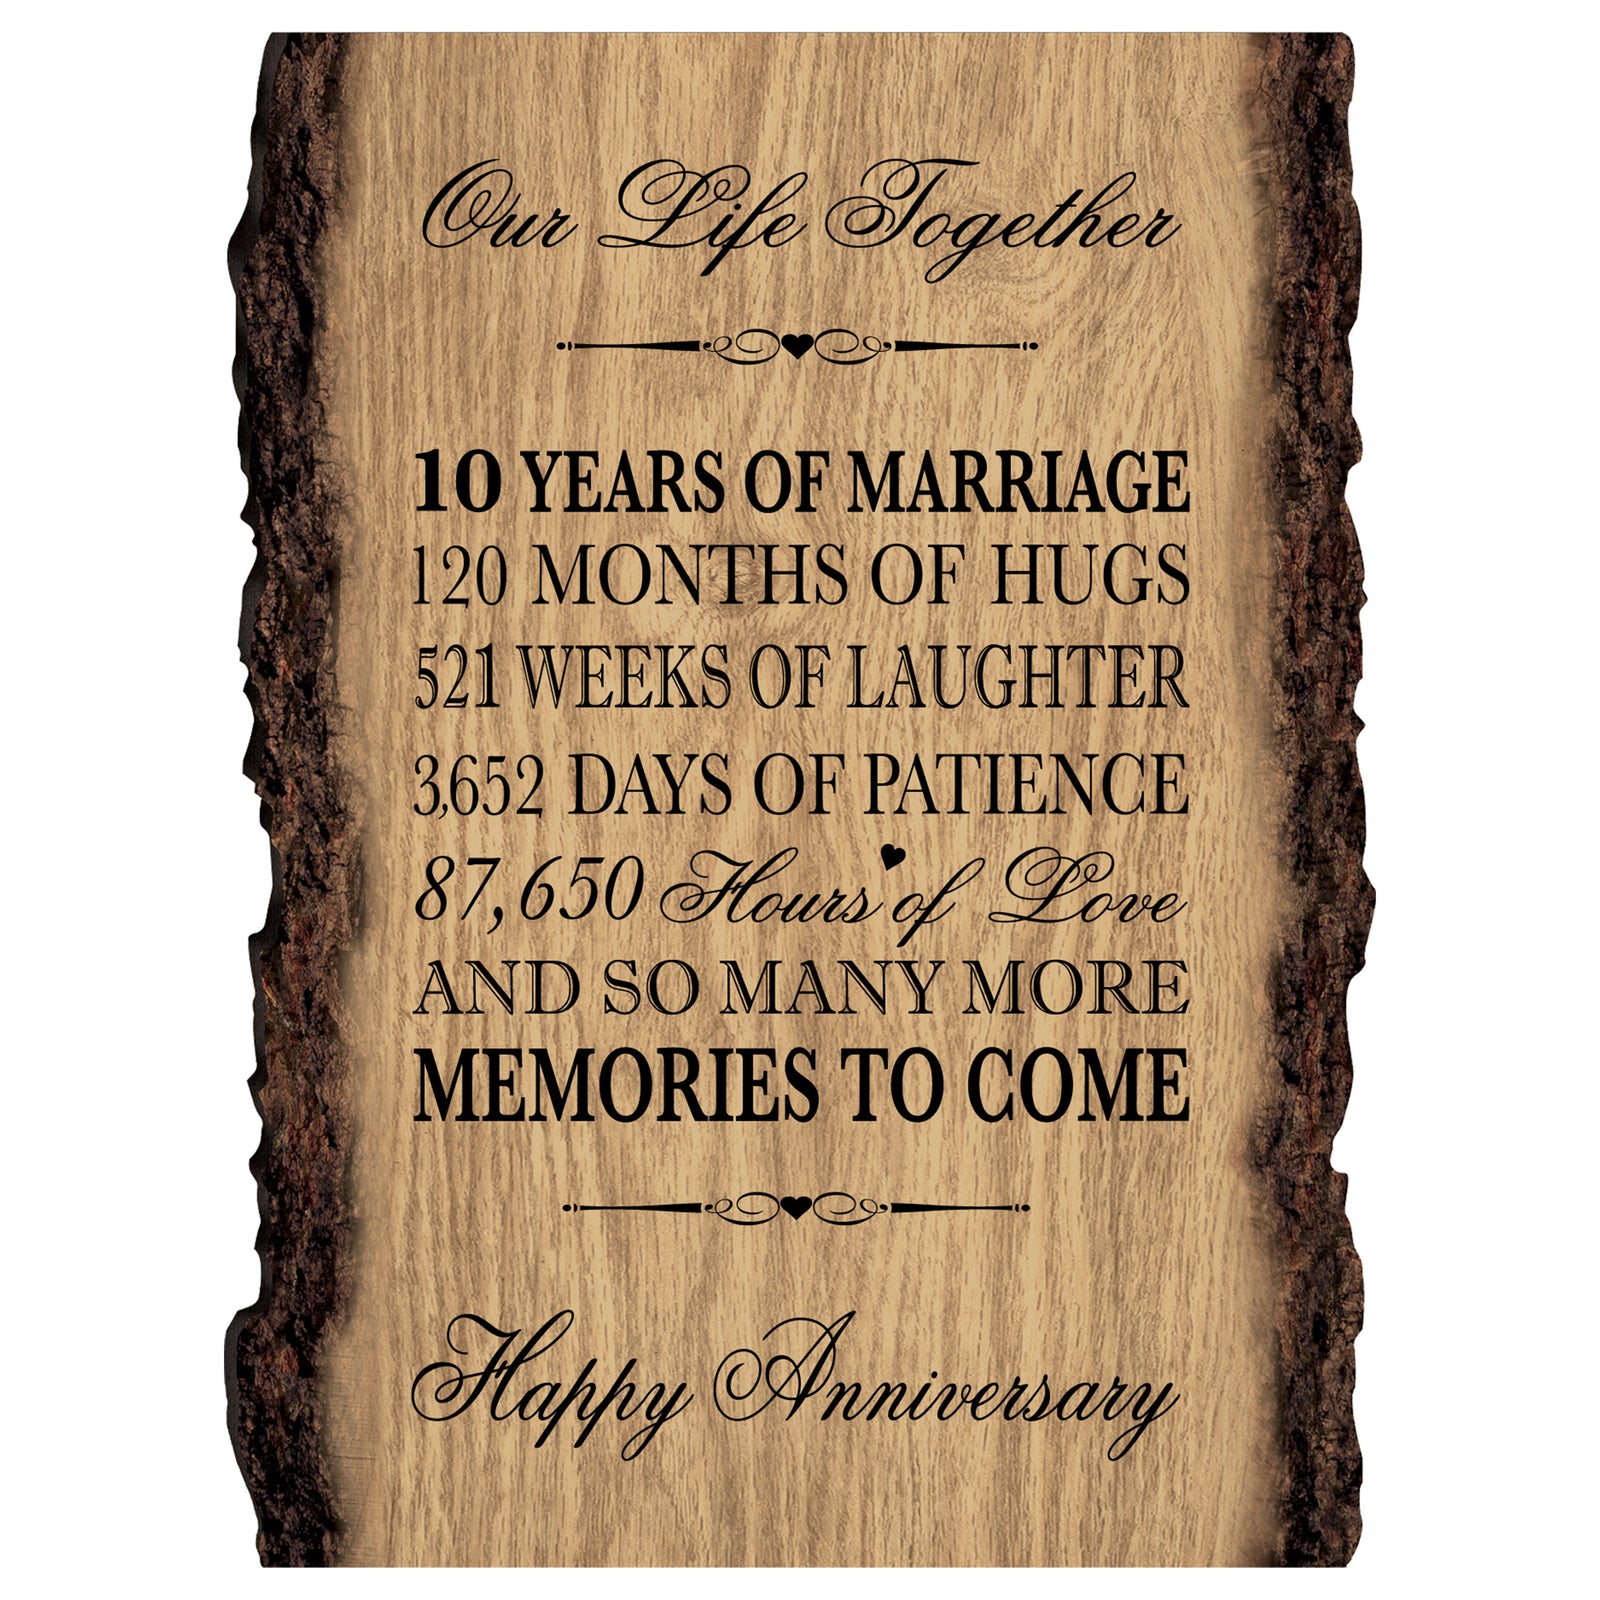 Rustic Wedding Anniversary 9x12 Barky Wall Plaque Gift For Parents, Grandparents New Couple - 10 Years Of Marriage